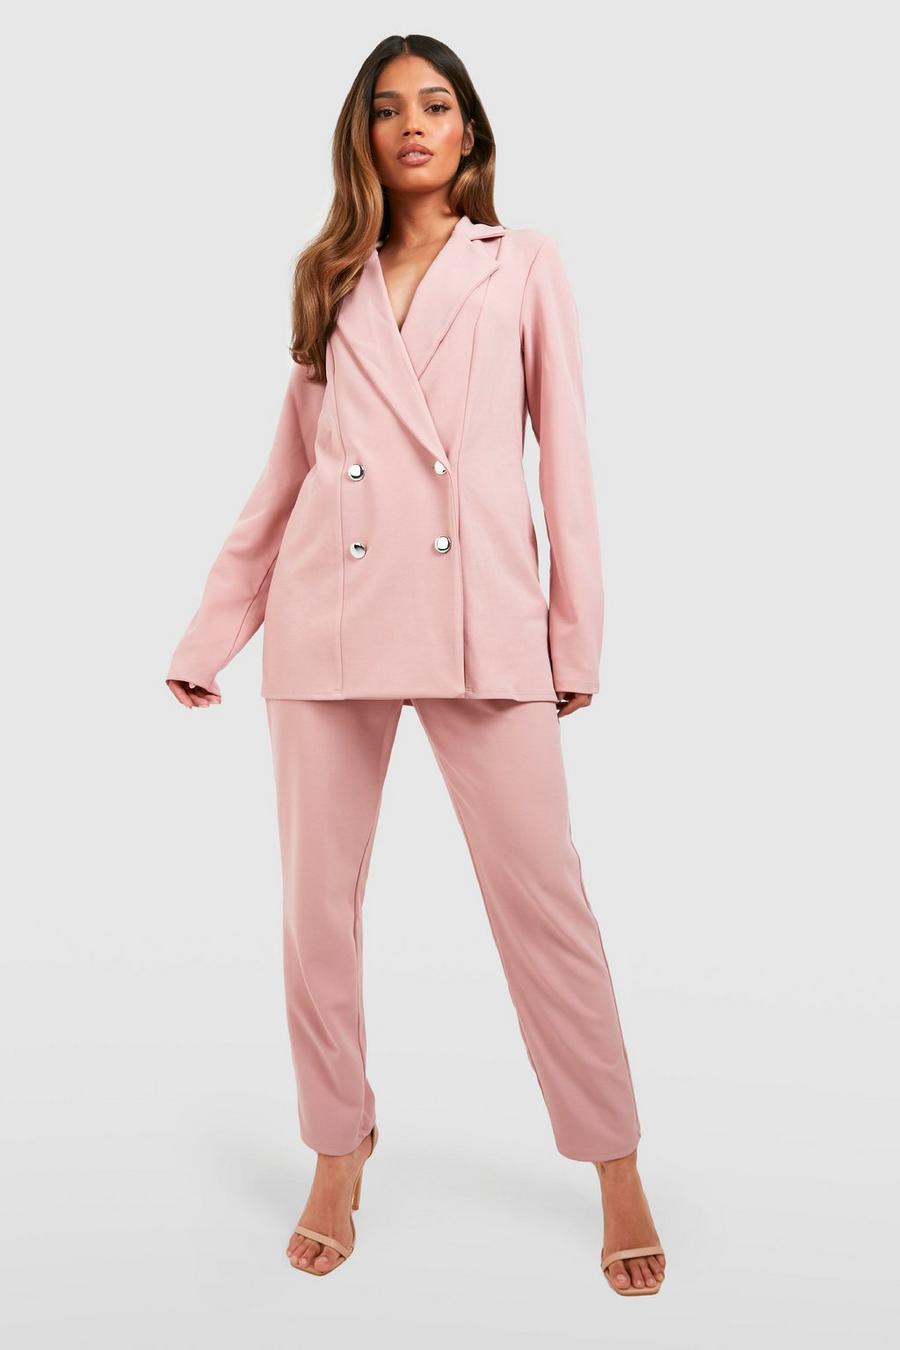 Rose Jersey Double Breasted Blazer & Straight Leg Trouser image number 1